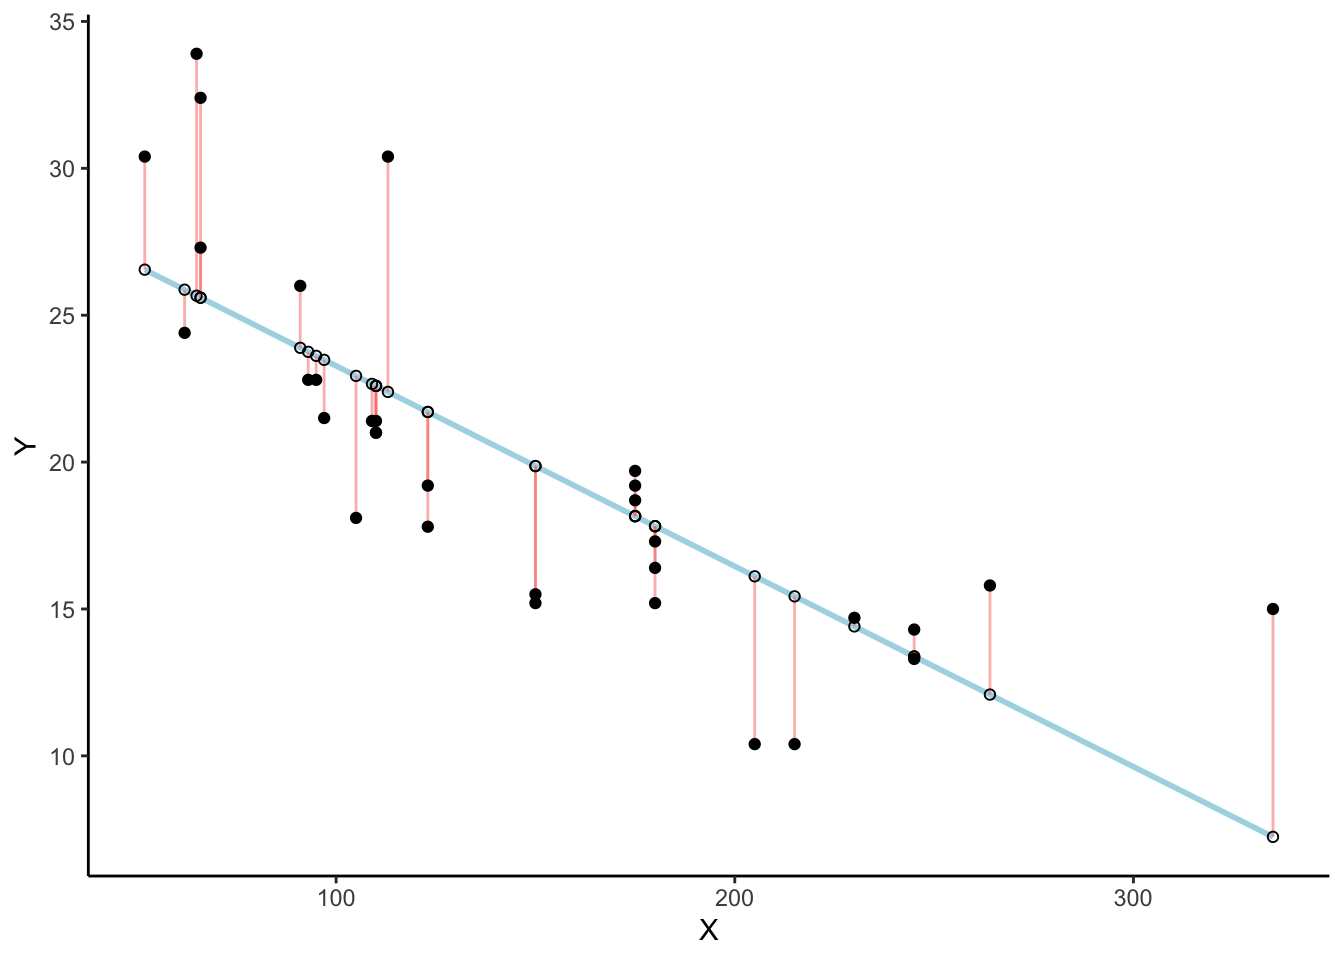 Black dots represent data points. The blue line is the best fit regression line. The white dots are repesent the predicted location of each black dot. The red lines show the error between each black dot and the regression line. The blue line is the best fit line because it minimizes the error shown by the red lines